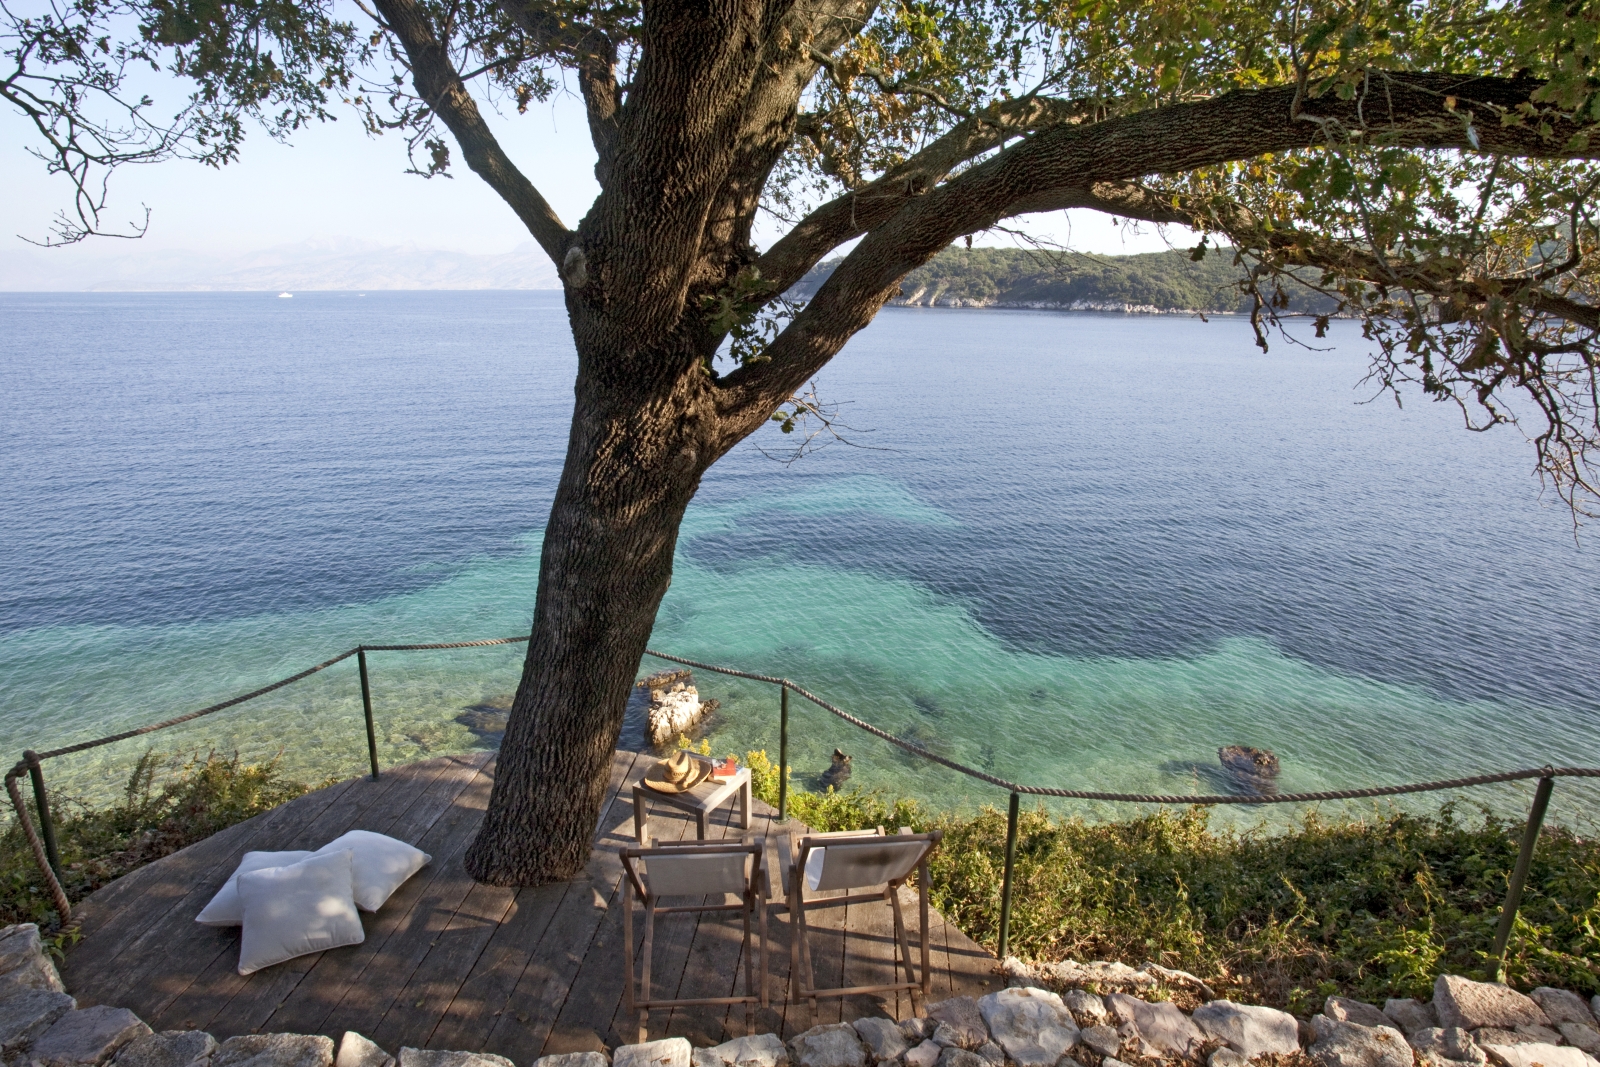 Beach side balcony with deck chairs, coffee table, cushions, tree and sea view at the Odysseus Estate on Corfu, Greece